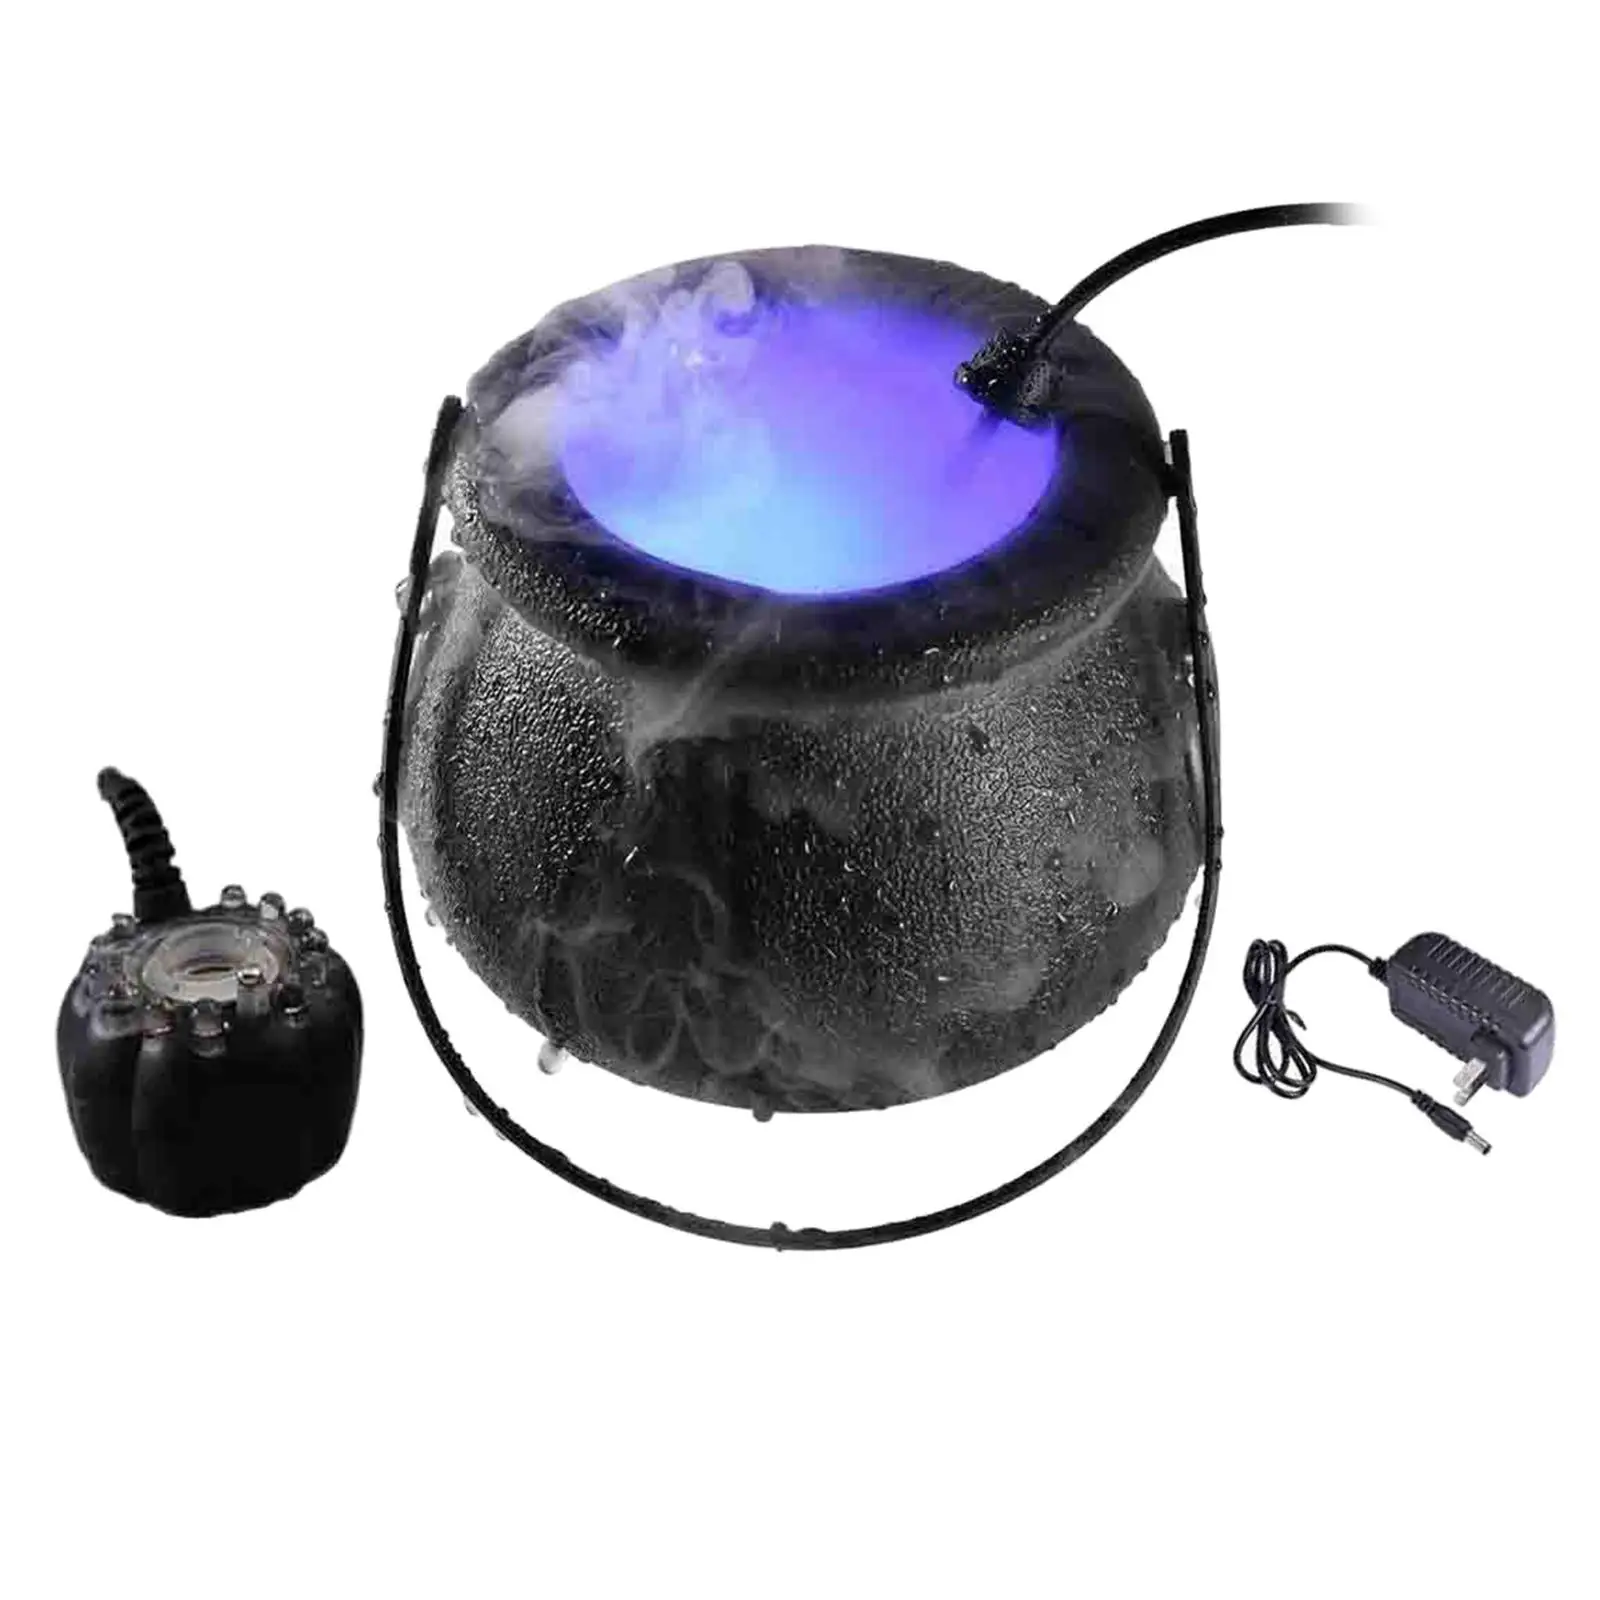 Mist Maker Fogger Fog Mister 12 LED Lights Humidifier Color Changing Water Fountain for Fish Tank Christmas Yard Party Garden